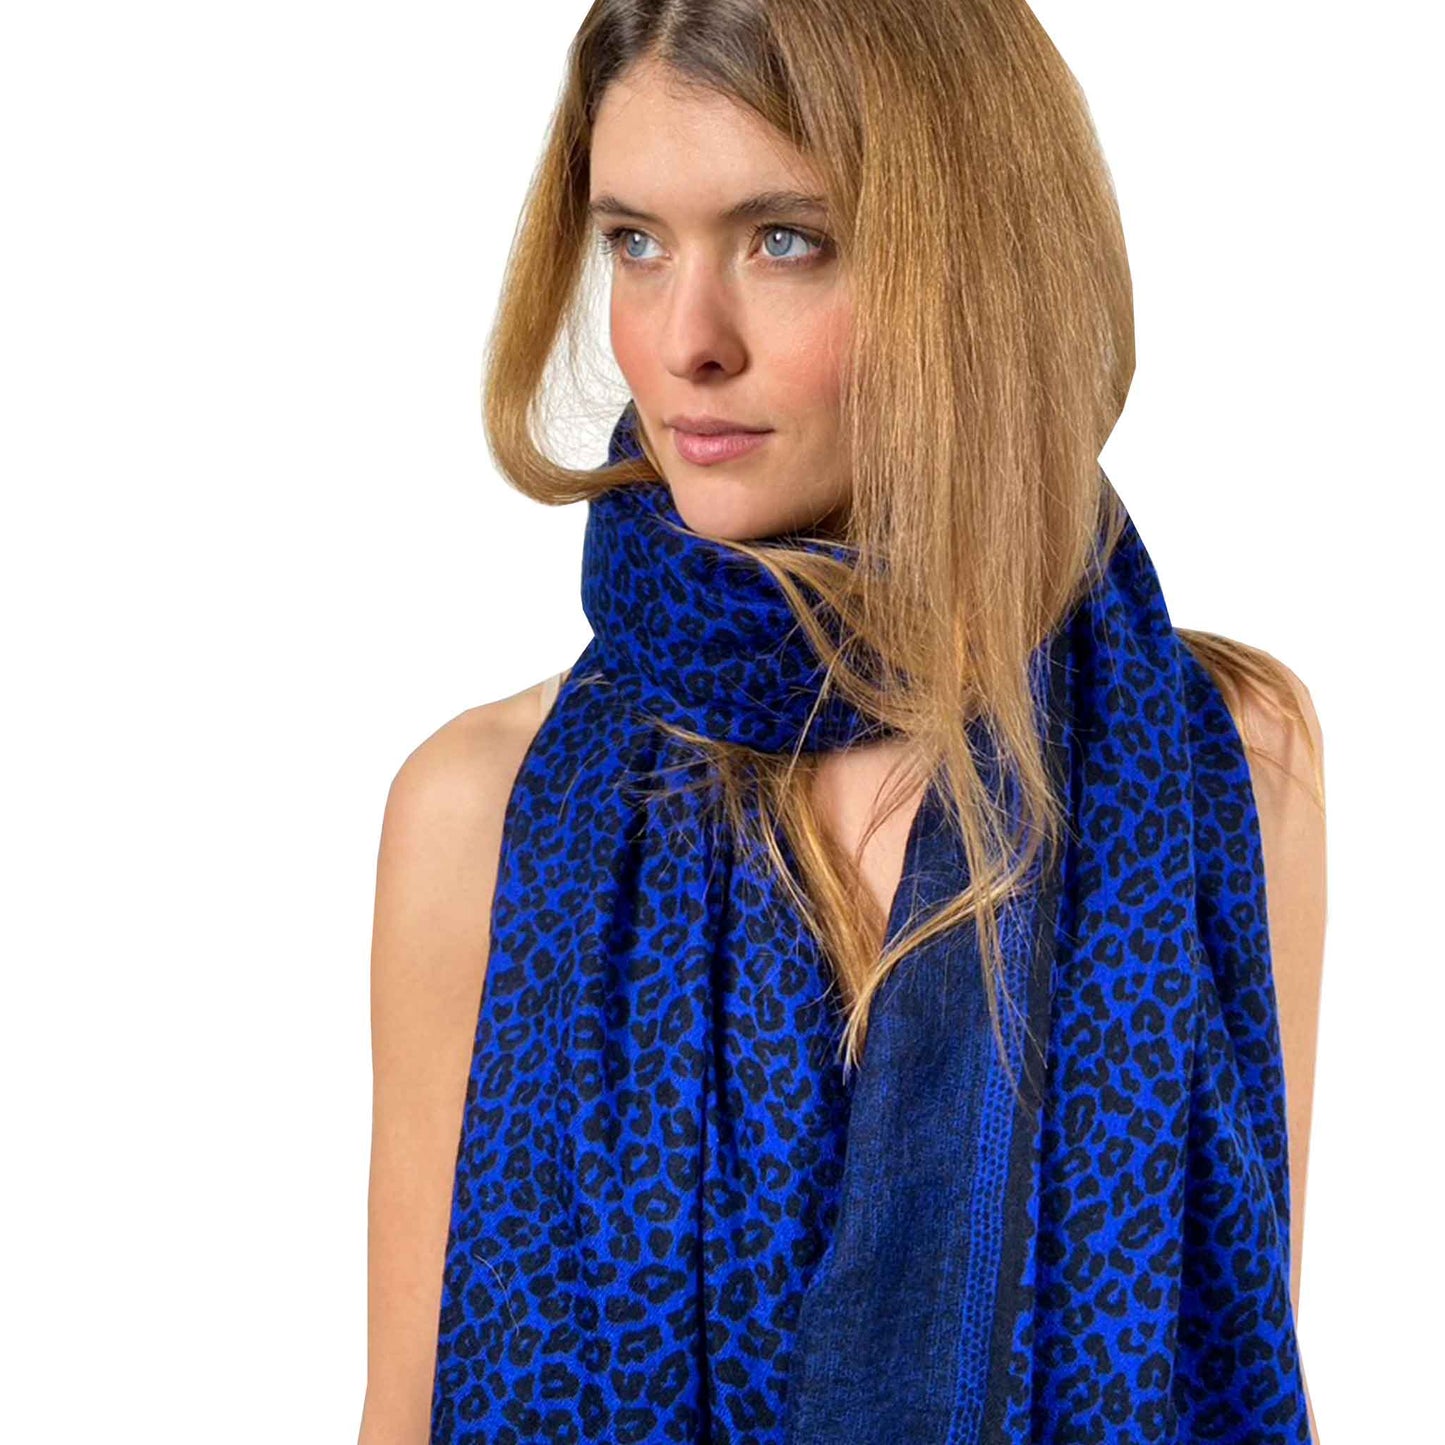 WE LOVE LEO FELTED CASHMERE SCARF